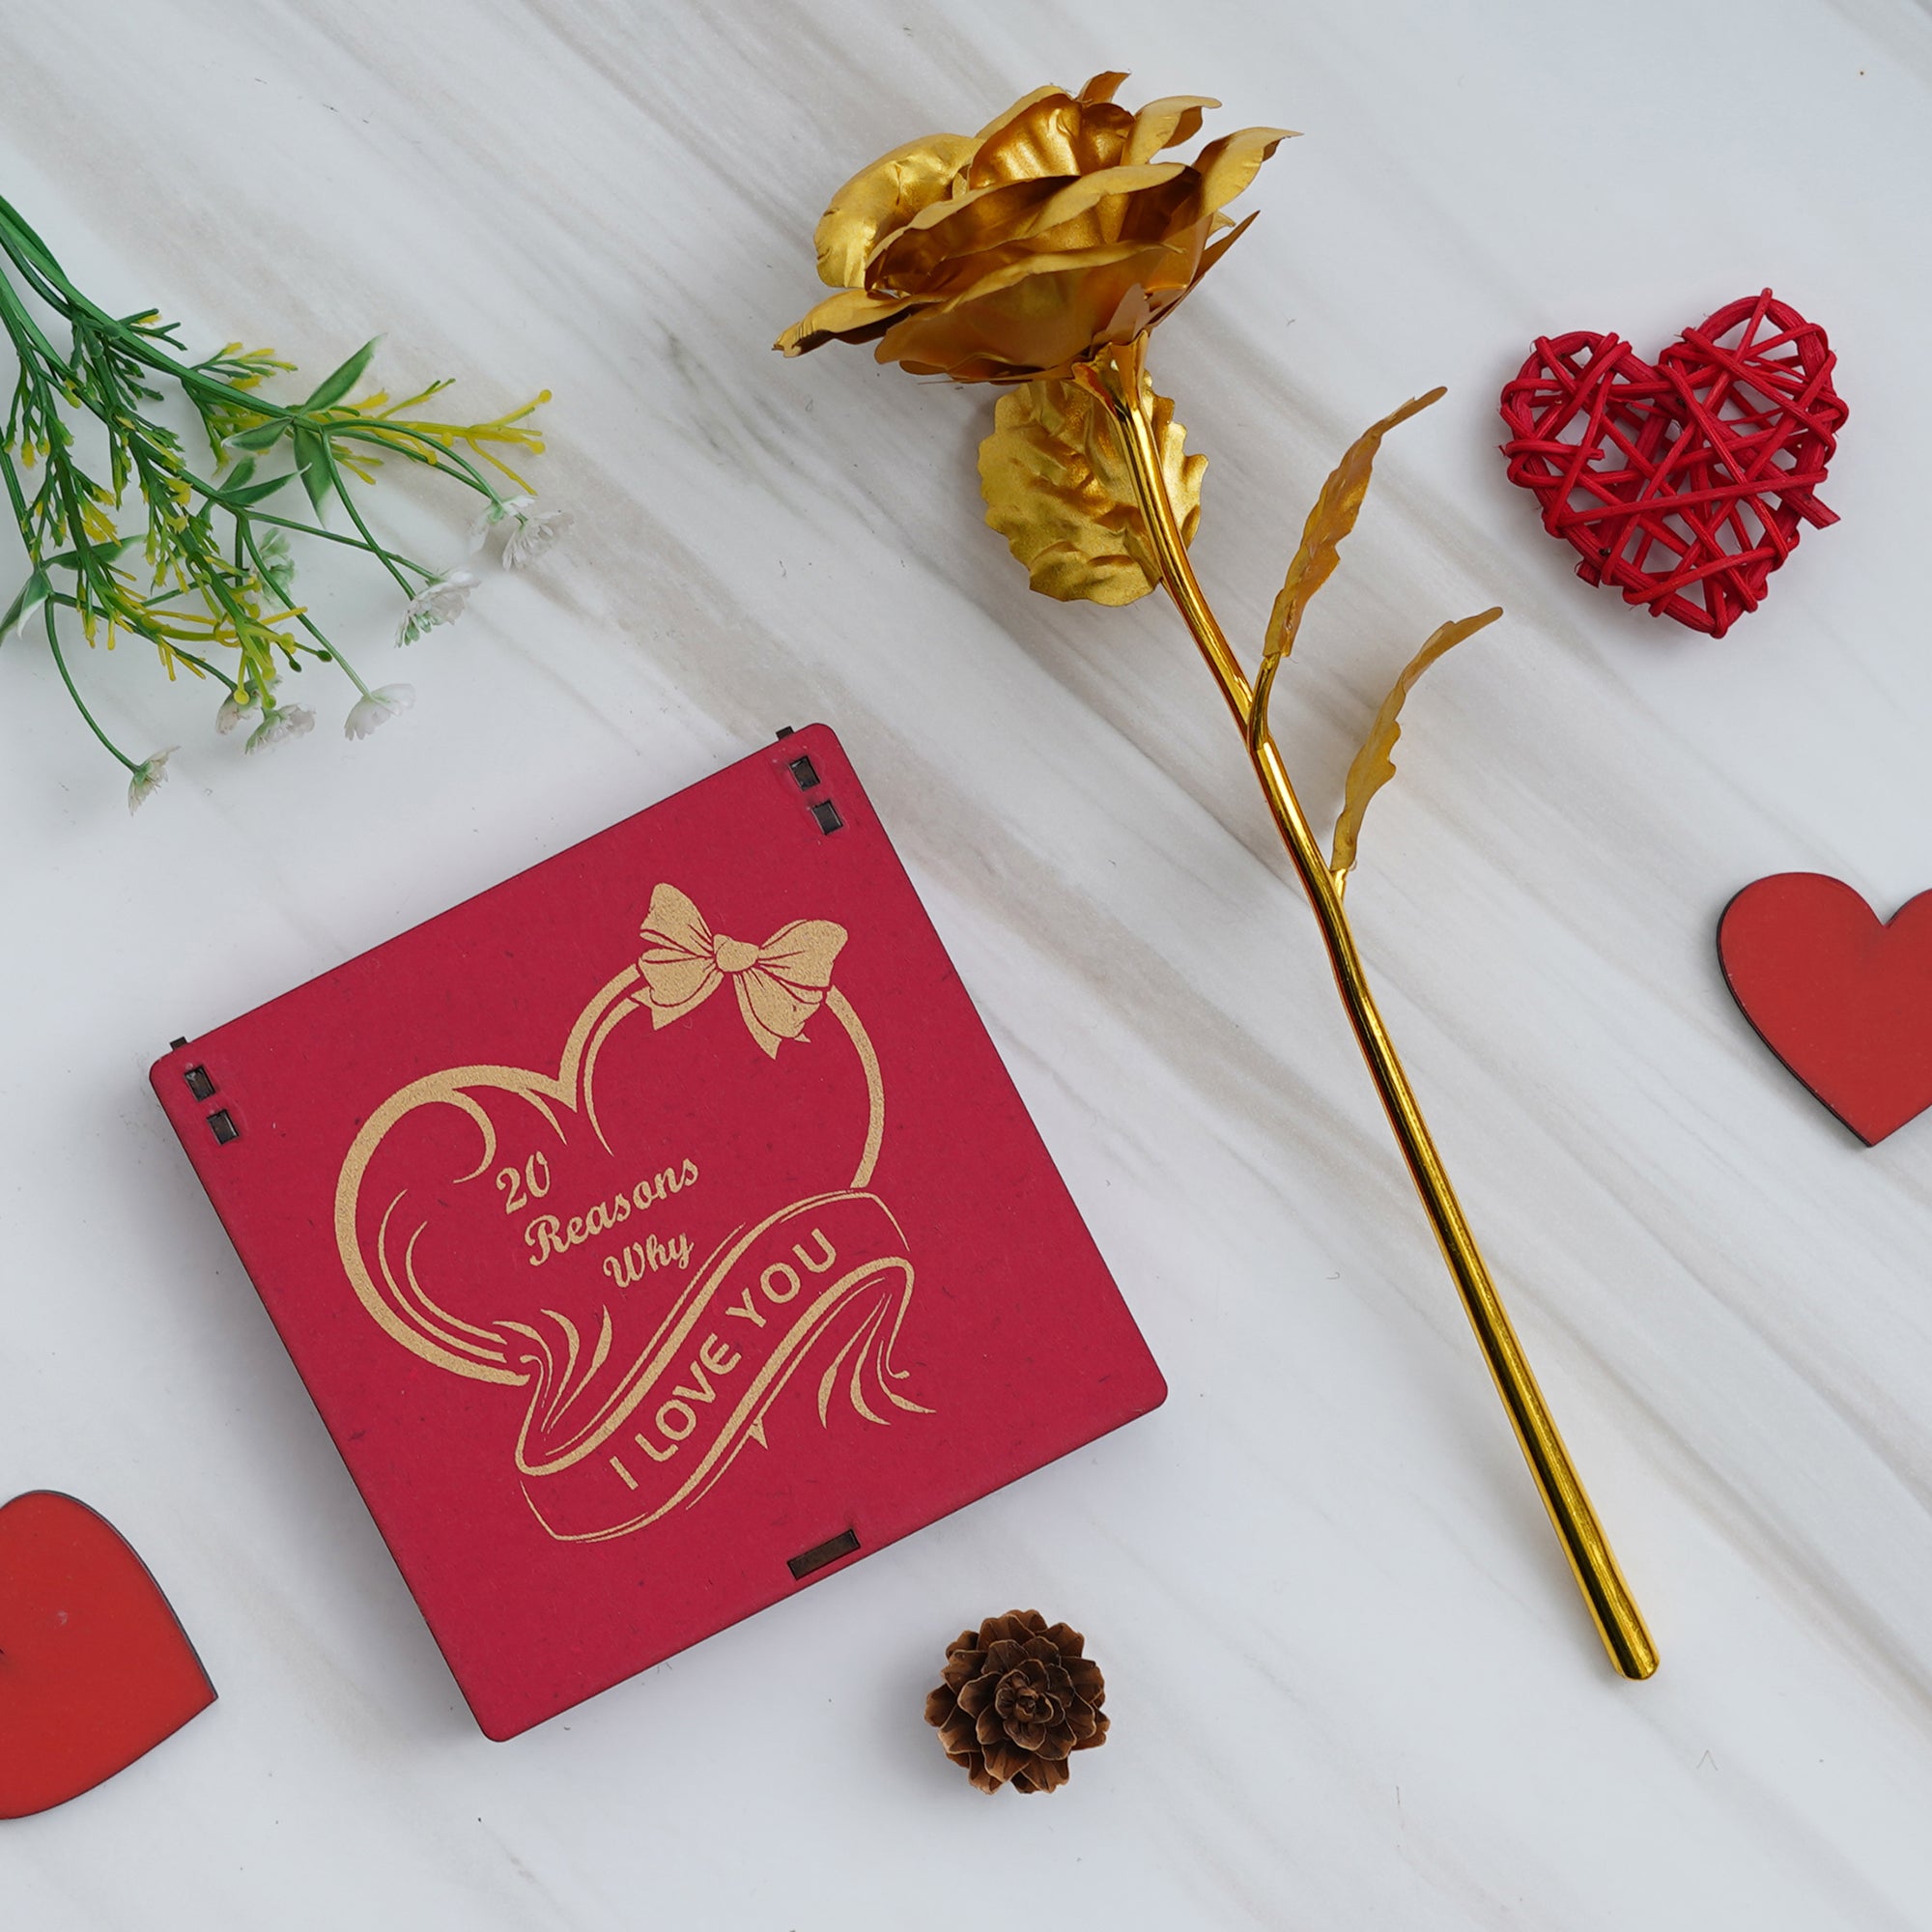 Valentine Combo of Golden Rose Gift Set, "20 Reasons Why I Love You" Printed on Little Red Hearts Decorative Wooden Gift Set Box